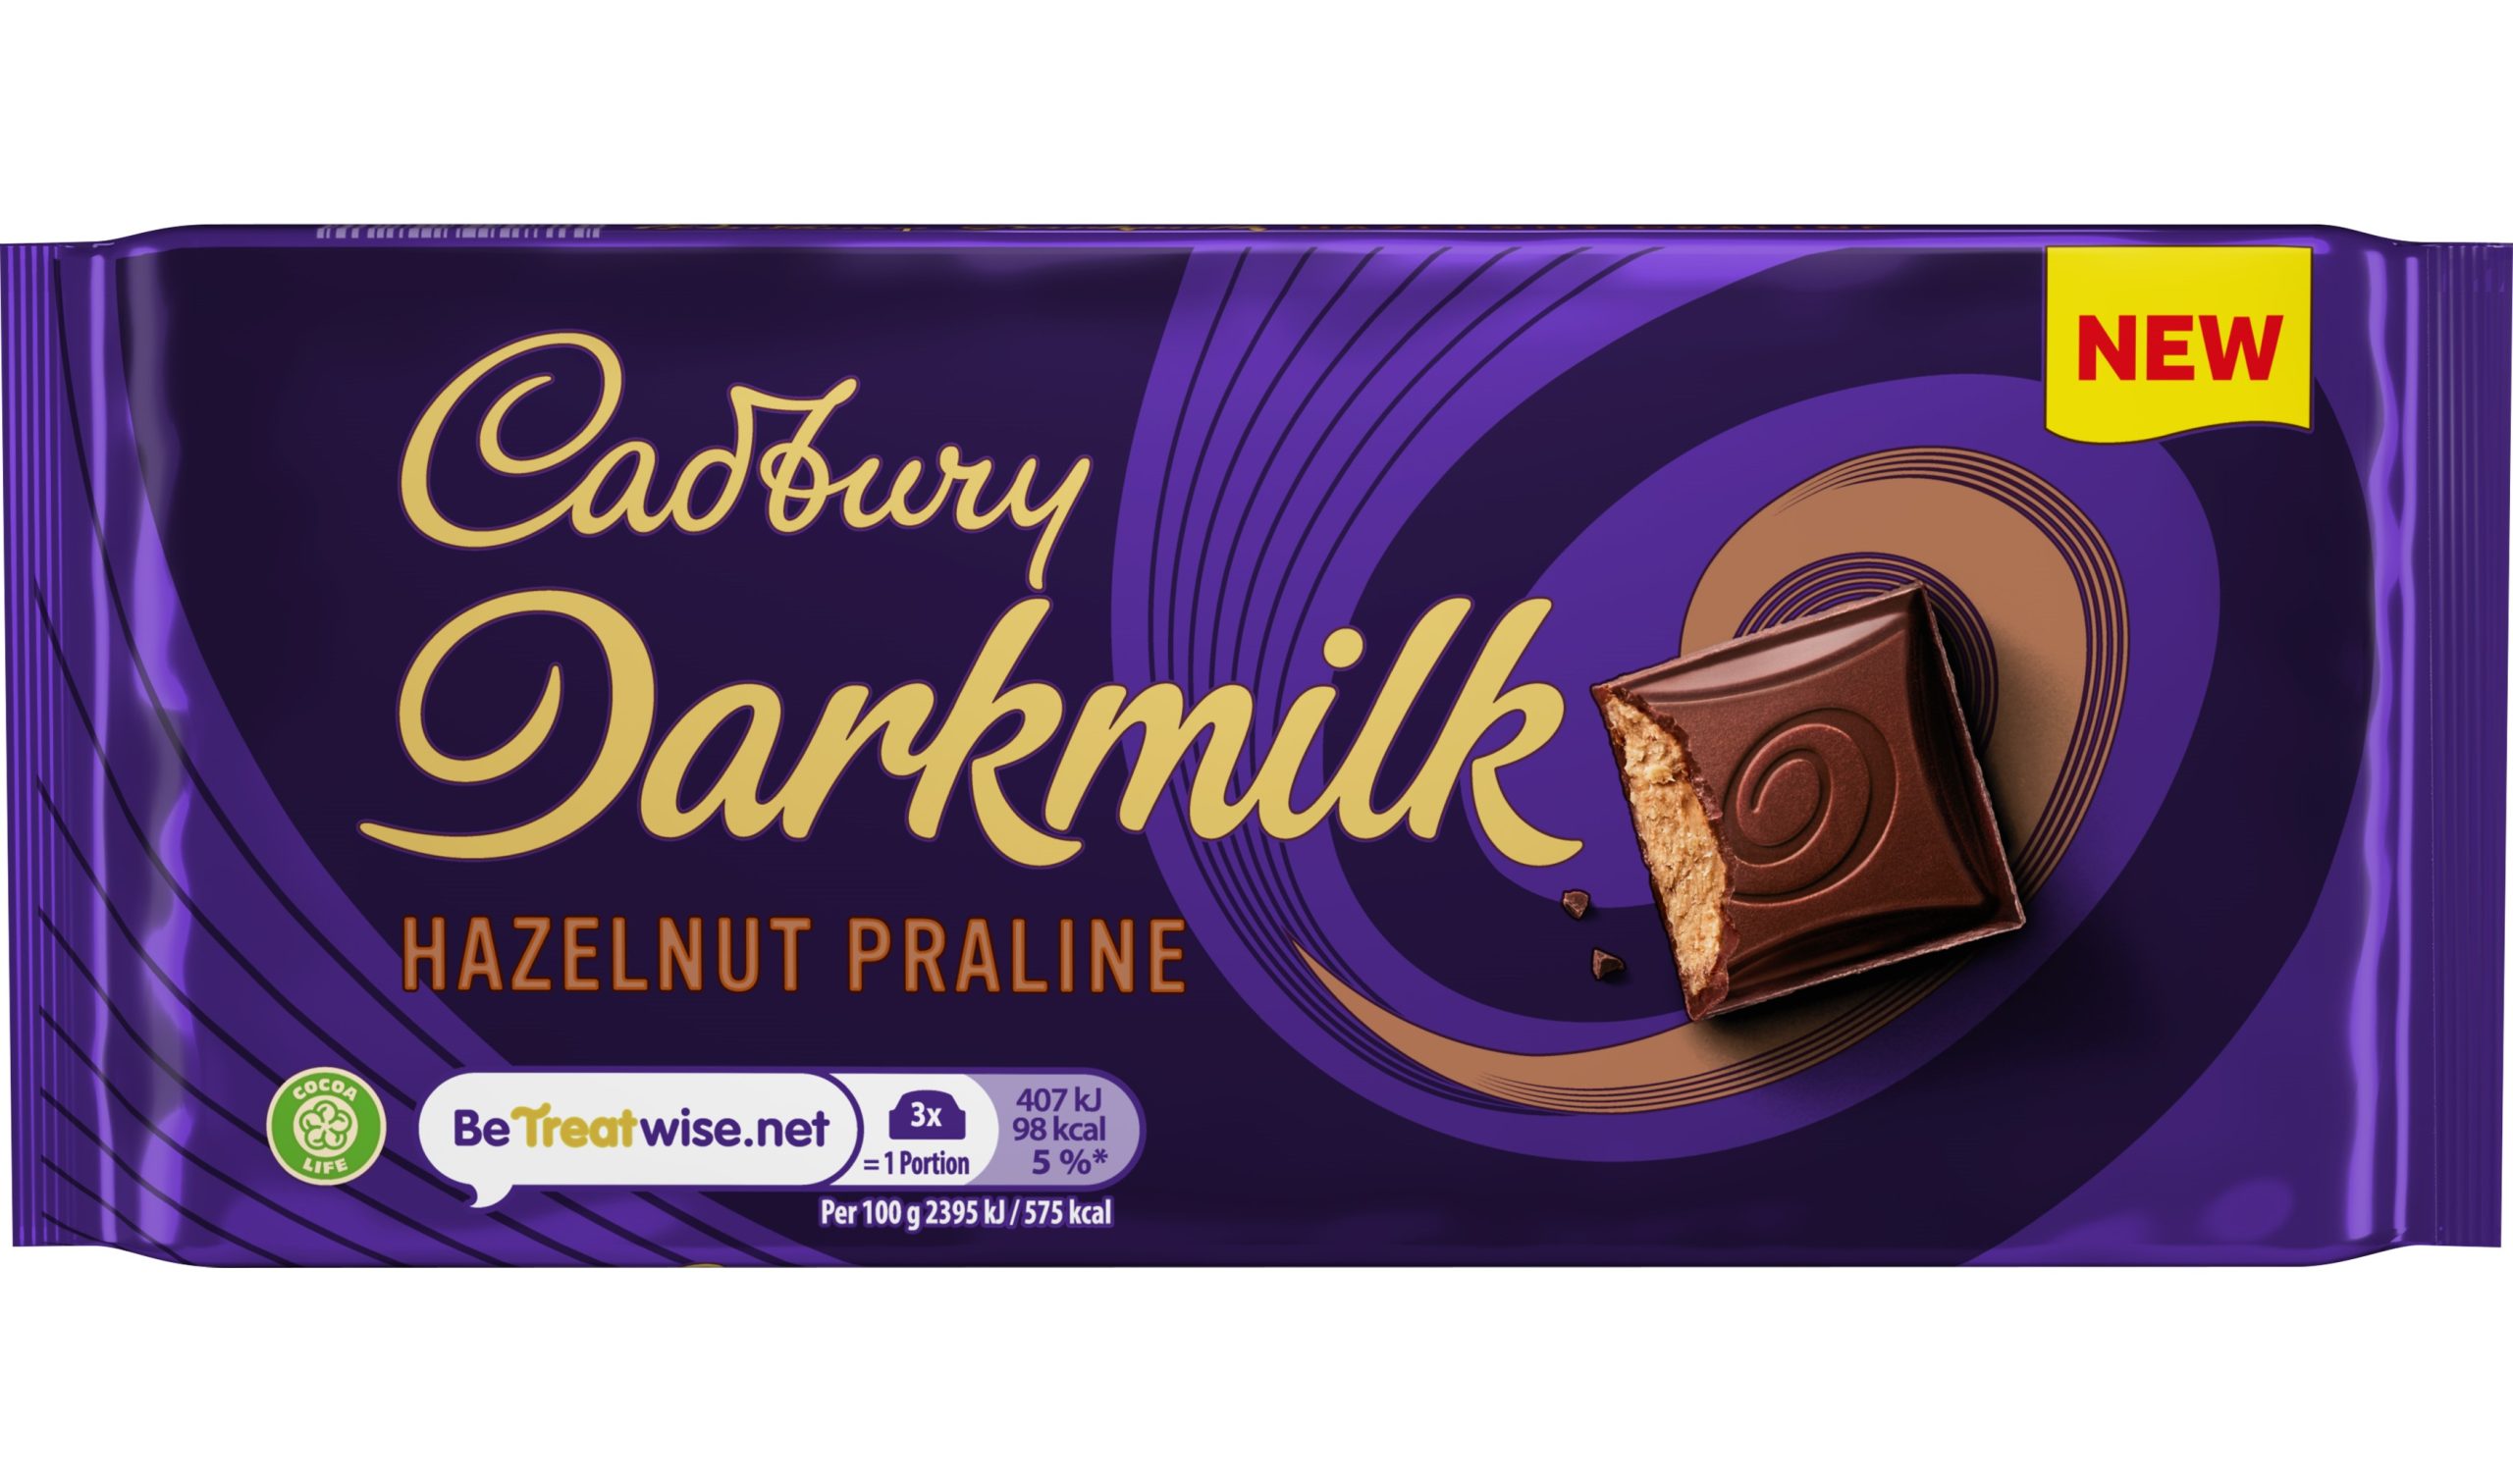 Cadbury builds on success of recent launches with two new tablets